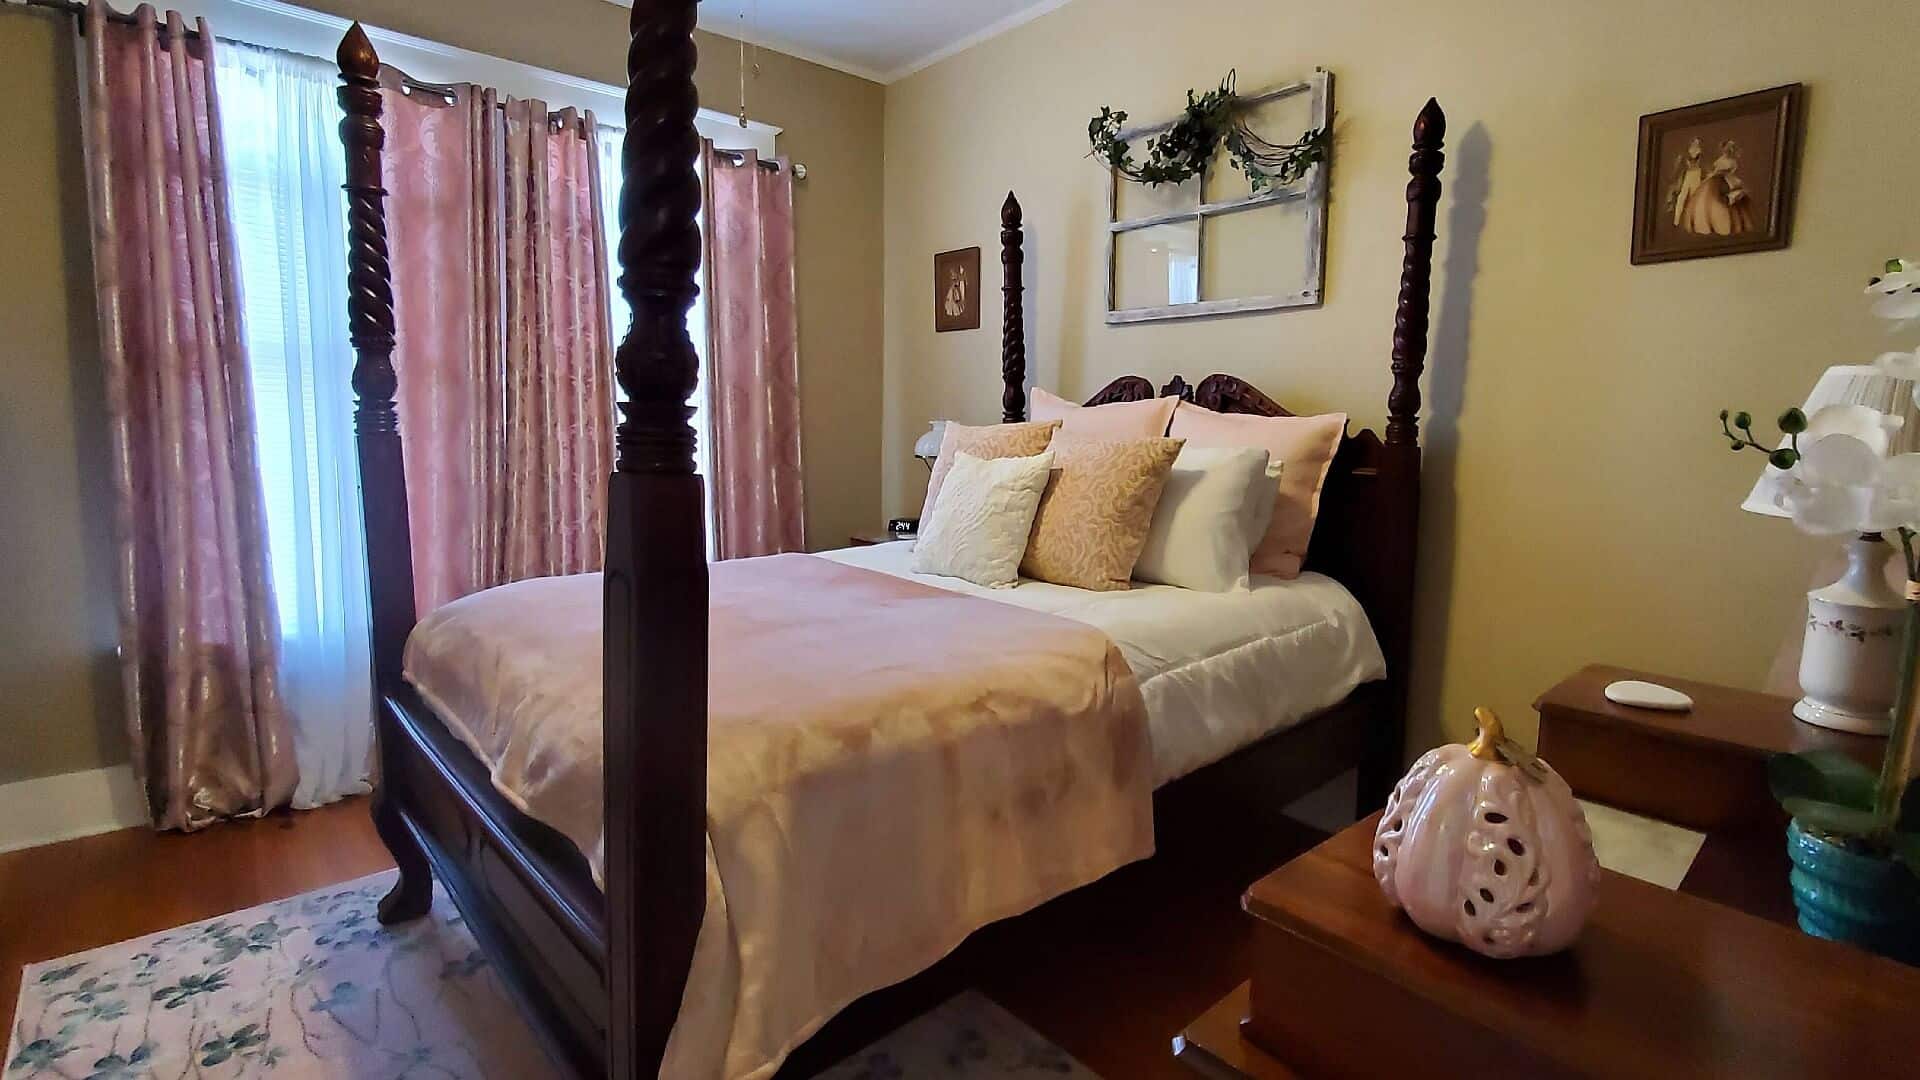 Elegant bedroom with four poster mahogany bed in pink and white linens with an antique dresser and large windows with curtains